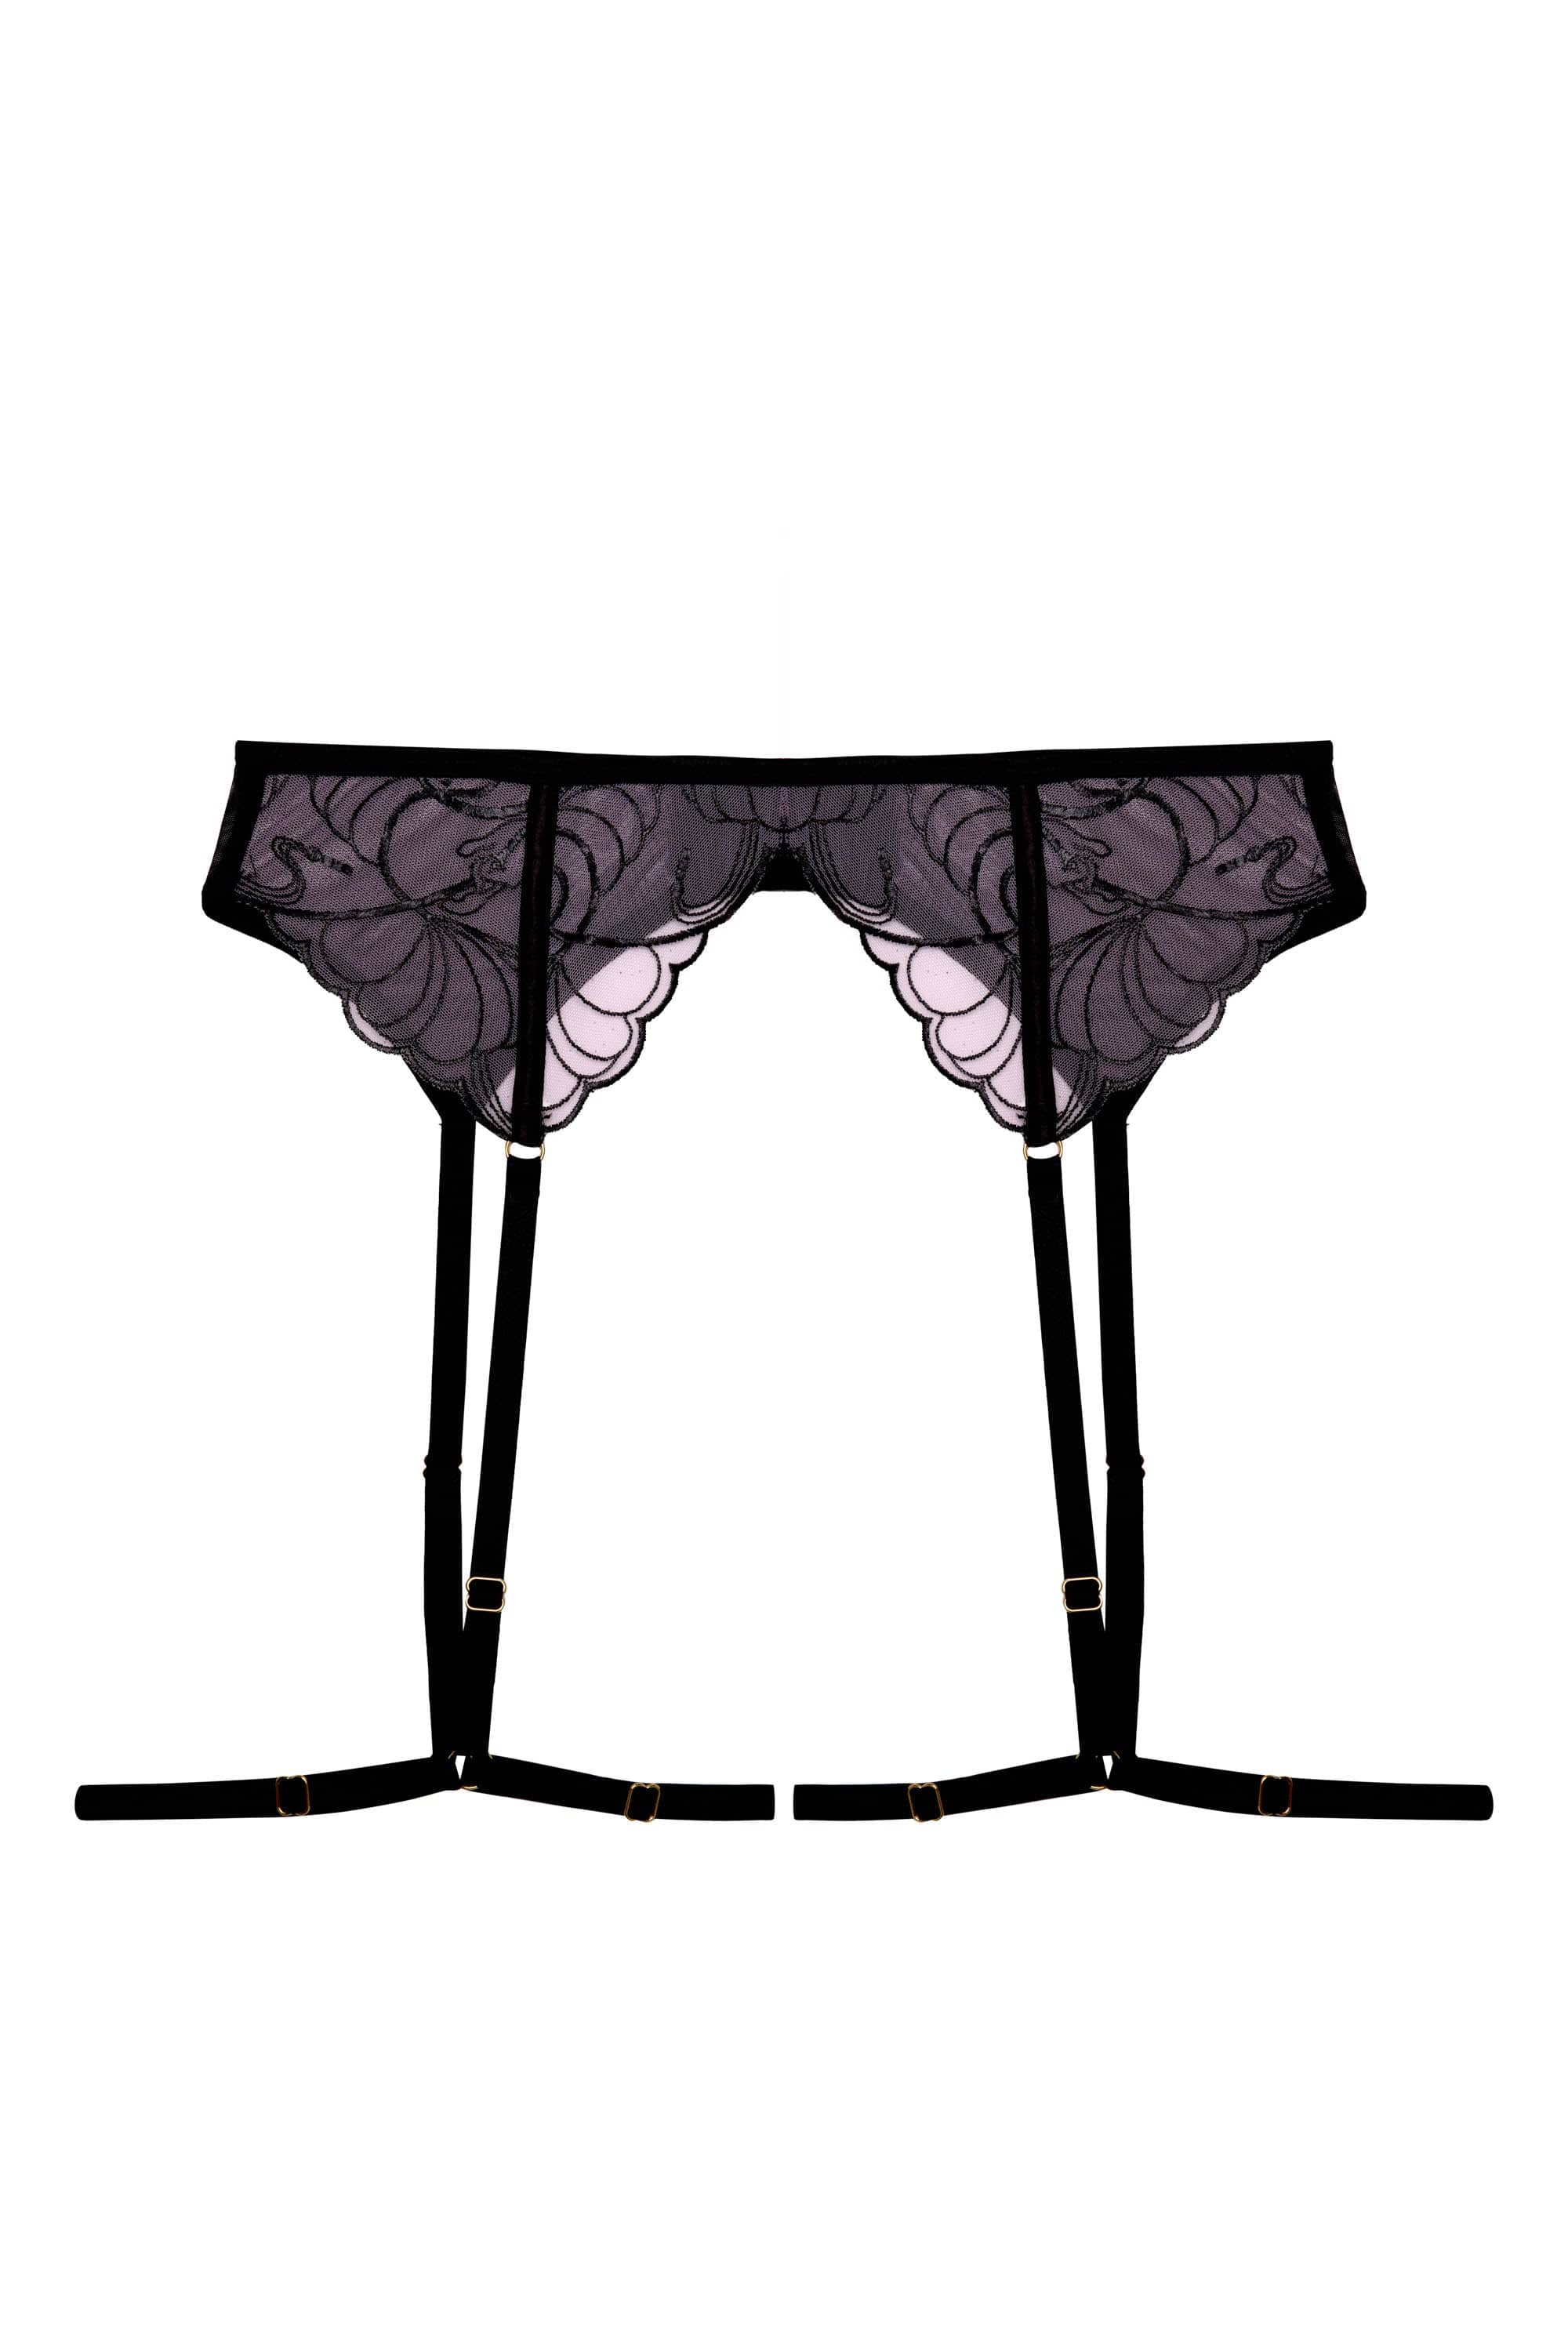 Pink and black embroidered suspender belt with thigh harness straps